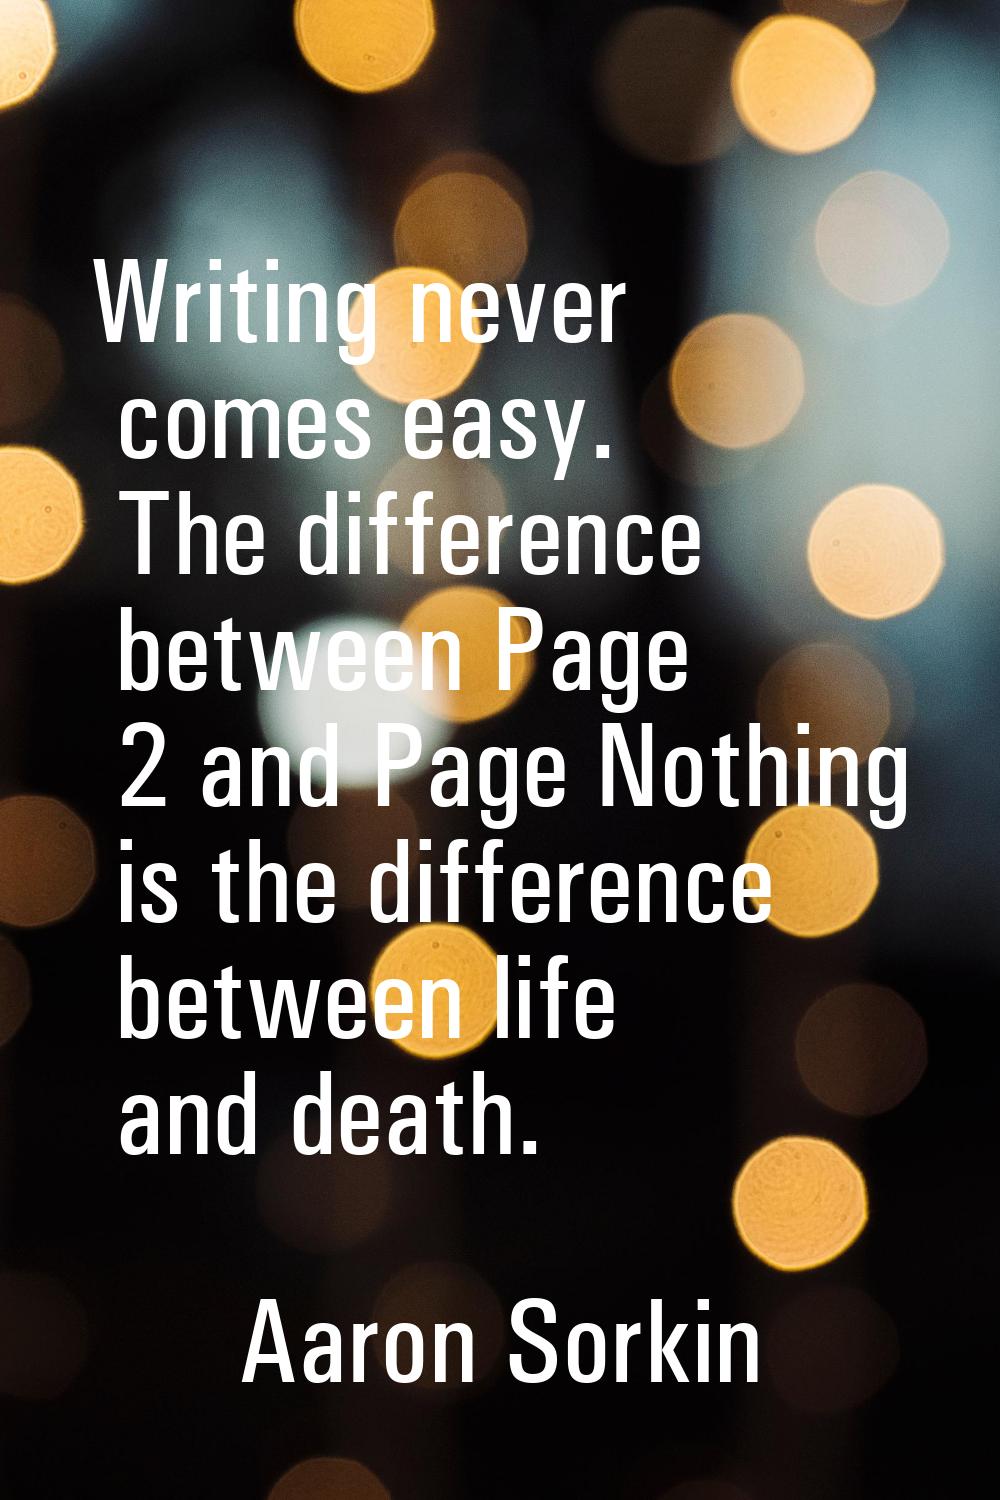 Writing never comes easy. The difference between Page 2 and Page Nothing is the difference between 